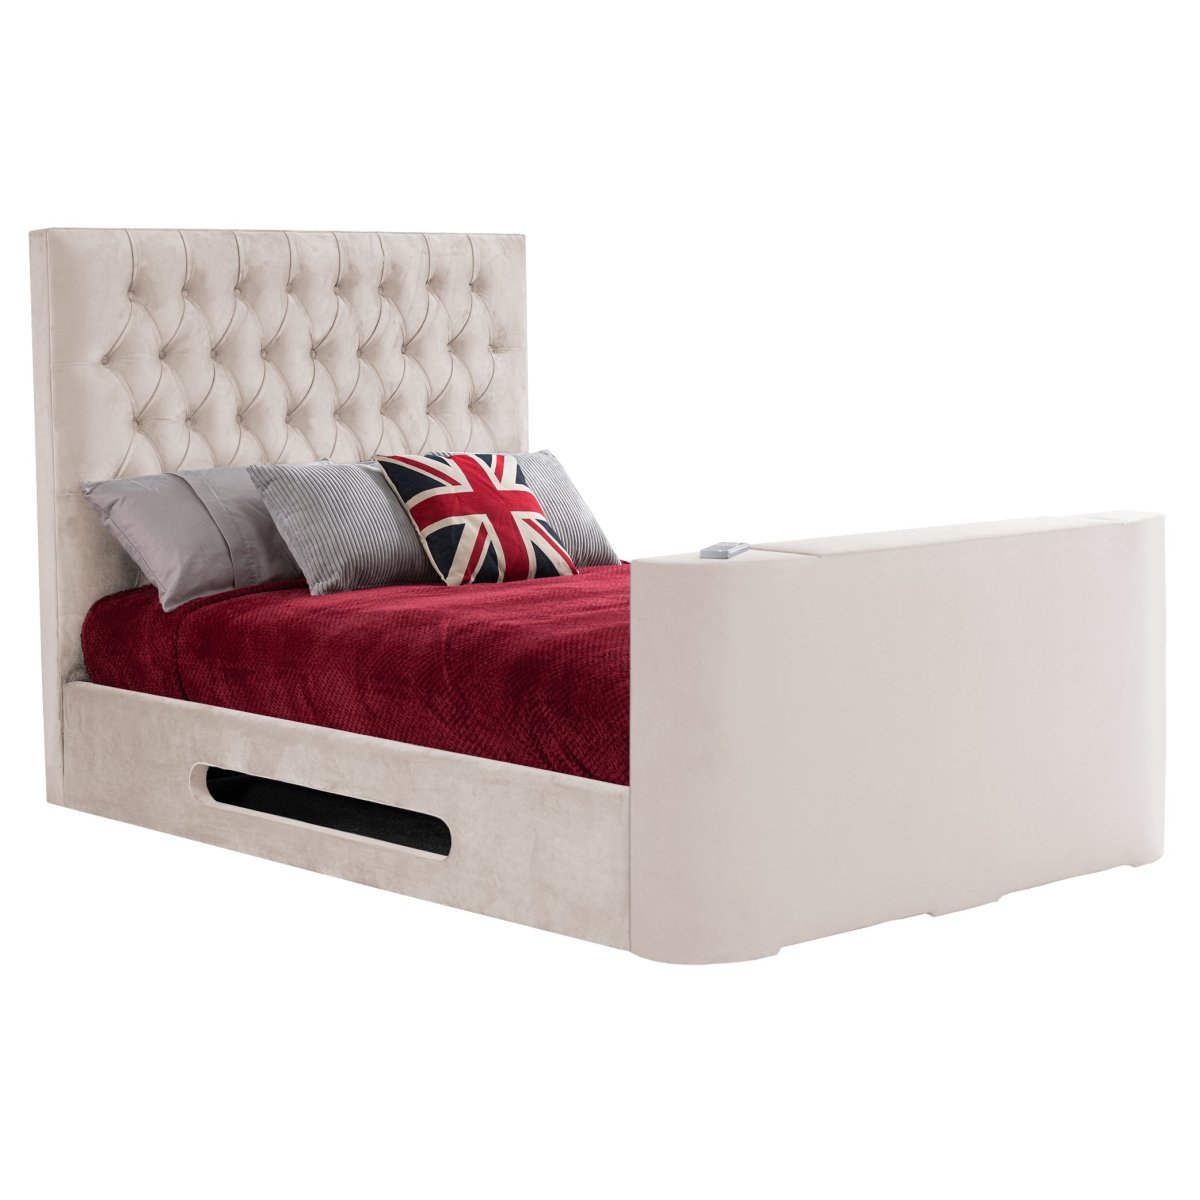 Loren Fabric TV Bed Frame - Sweet Dreams - TV Beds Northwest - INLORE-STD-135CHATSGRANITE - choose your colour tvbed - doubletvbed